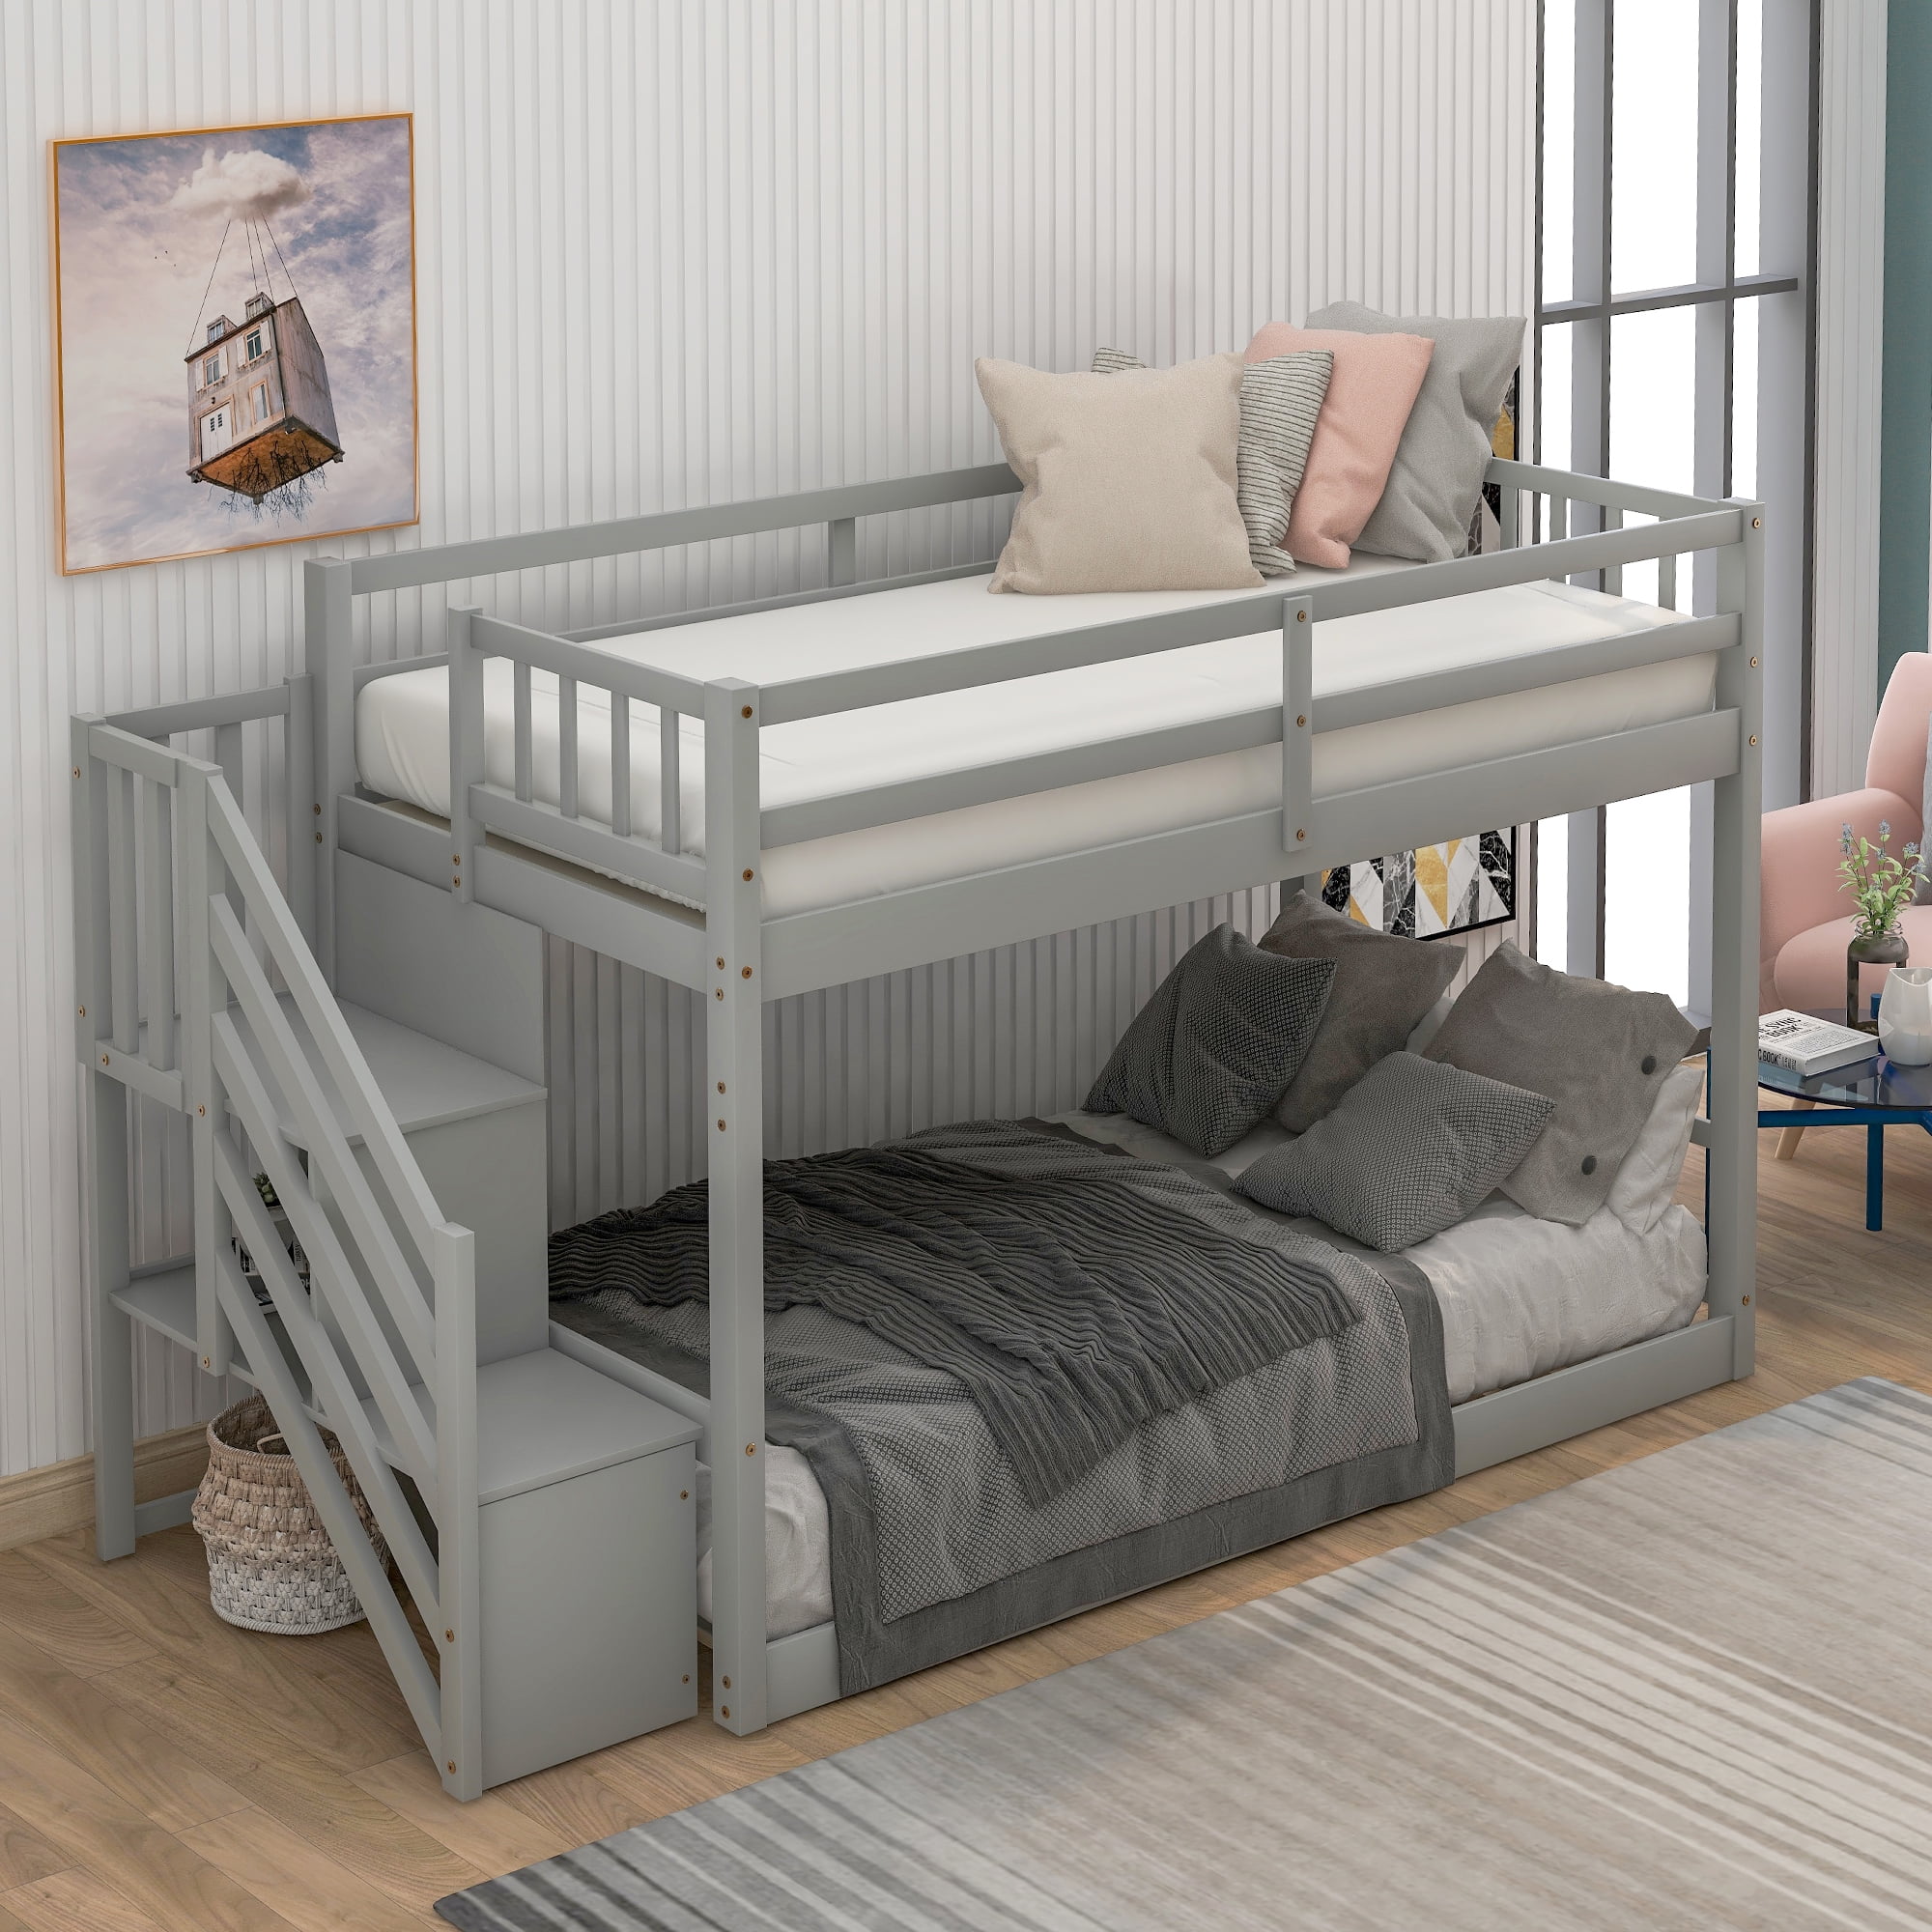 Euroco Wood Twin Over Floor Bunk, Twin Over Double Bunk Bed With Stairs